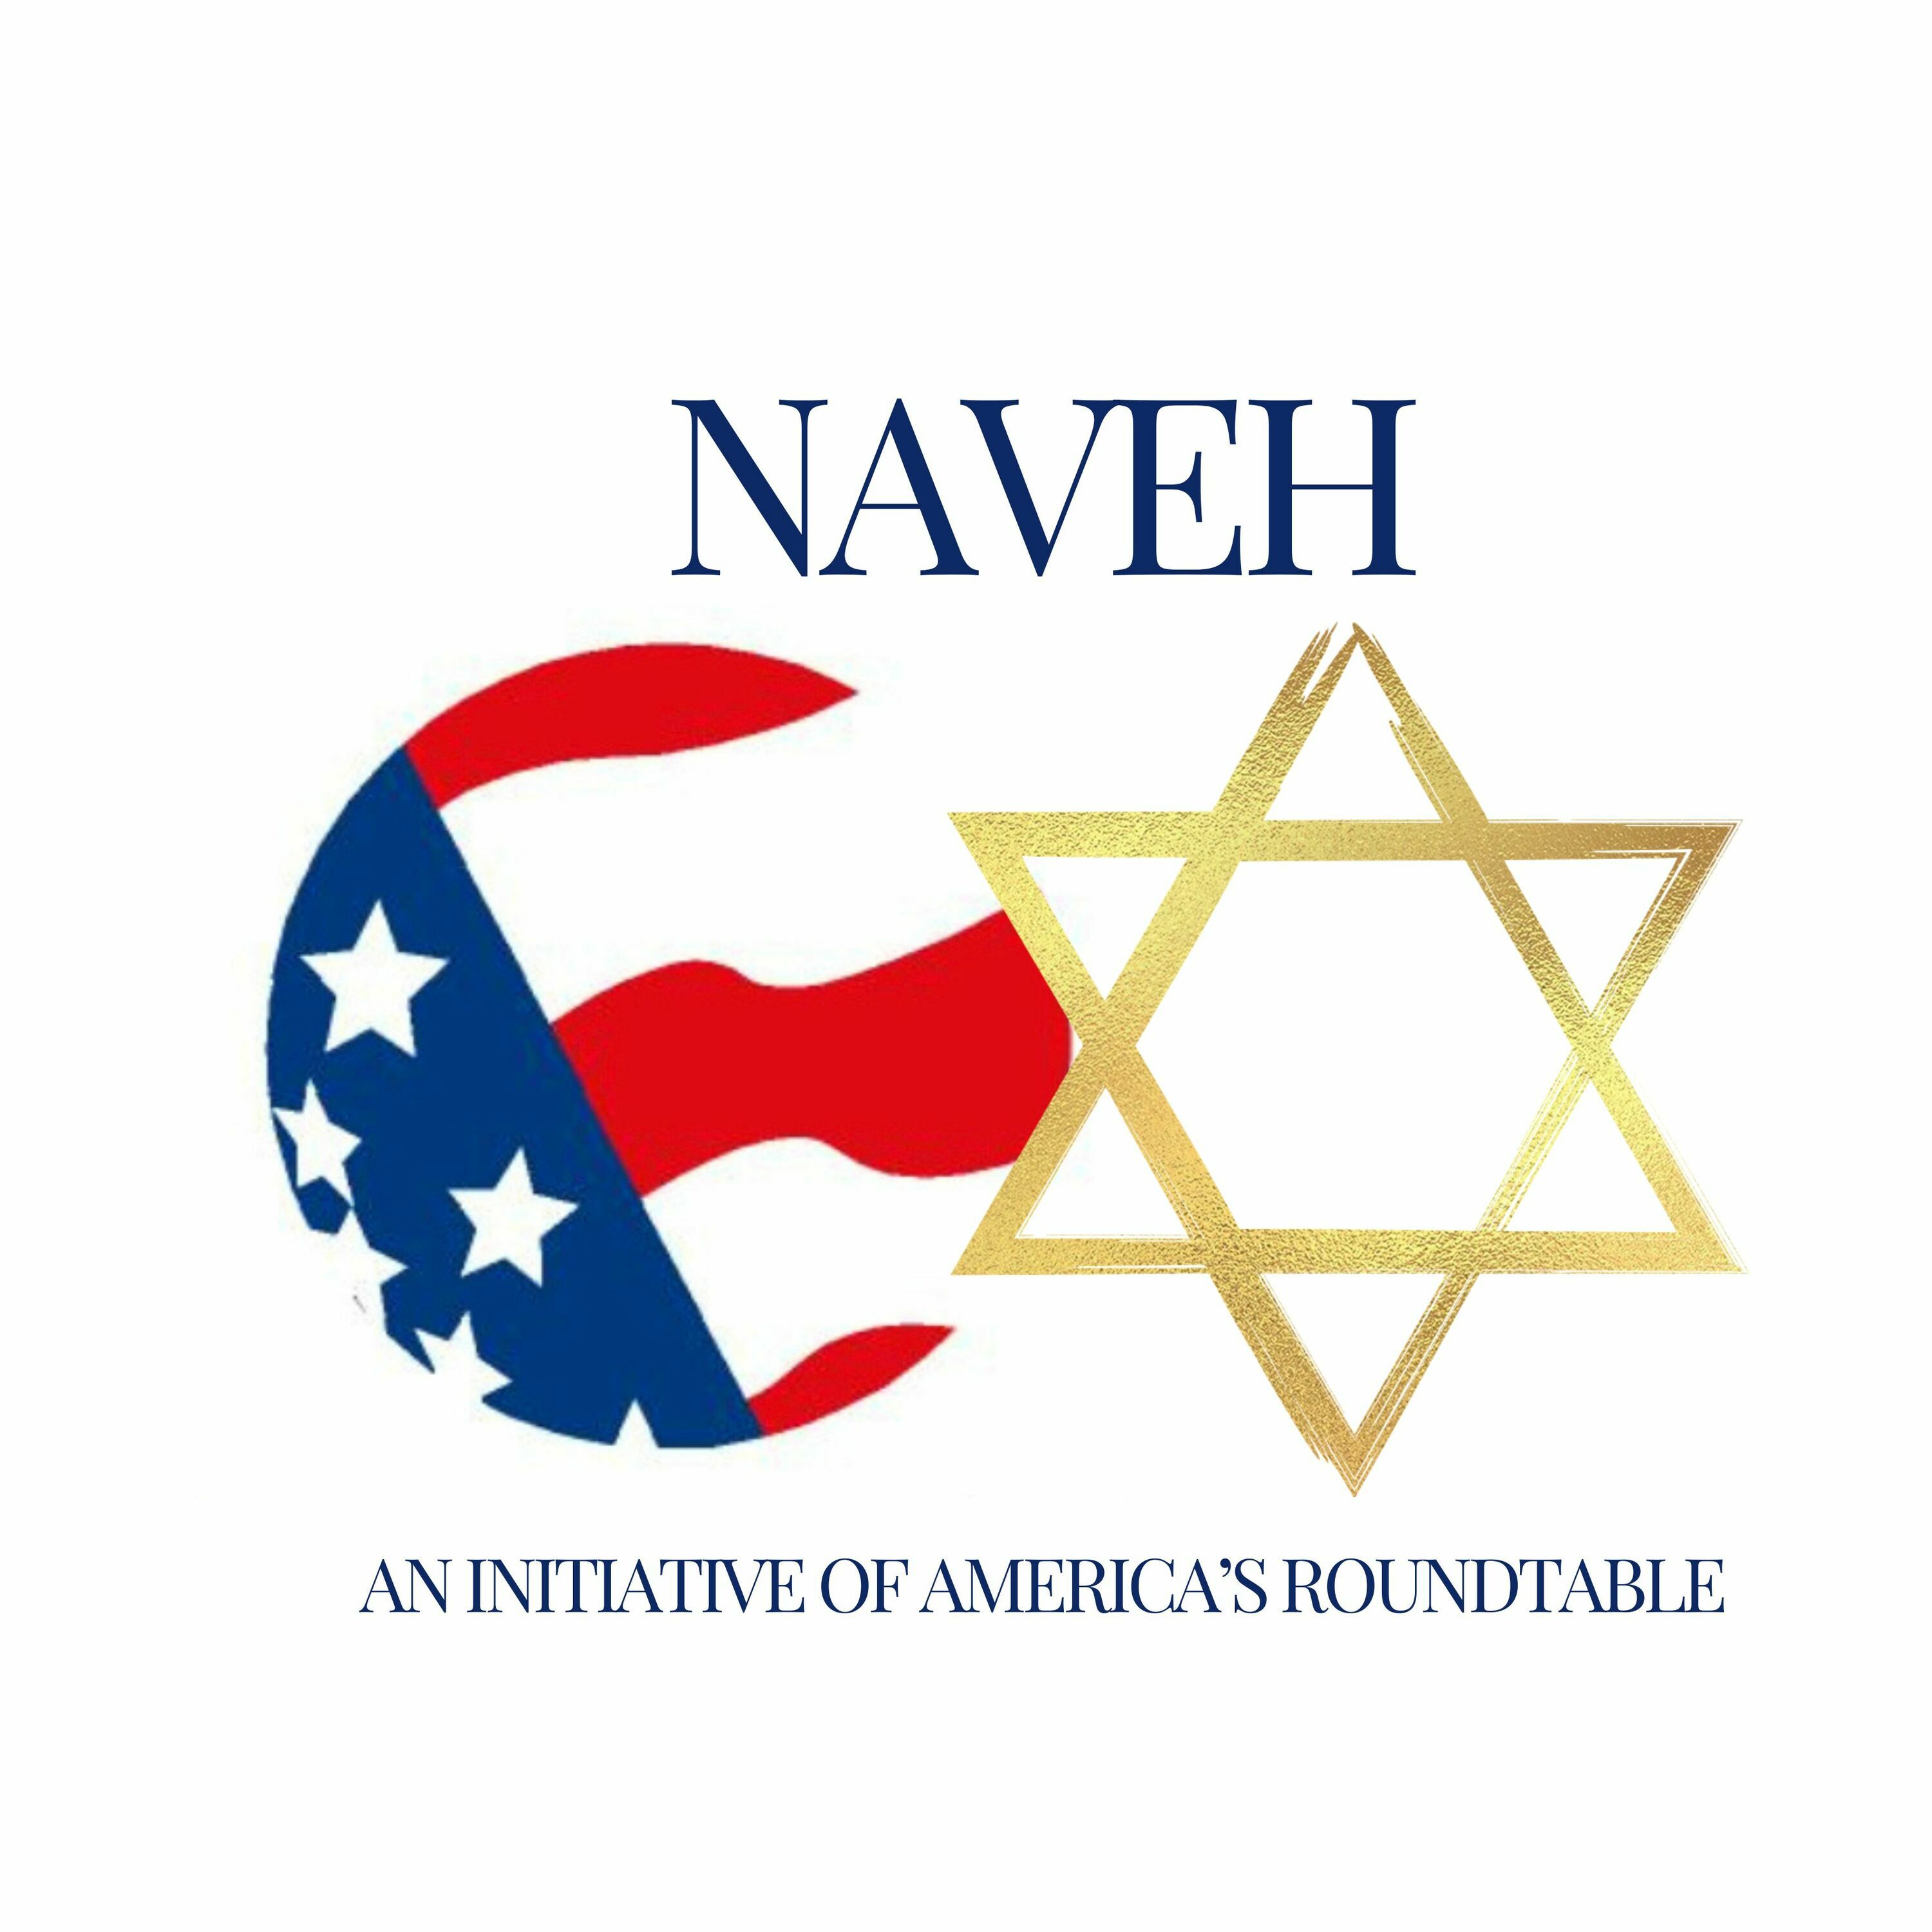 The Naveh — America's Roundtable | Convesation with Ambassador Elan Carr, Former Special Envoy to Monitor and Combat Anti-Semitism